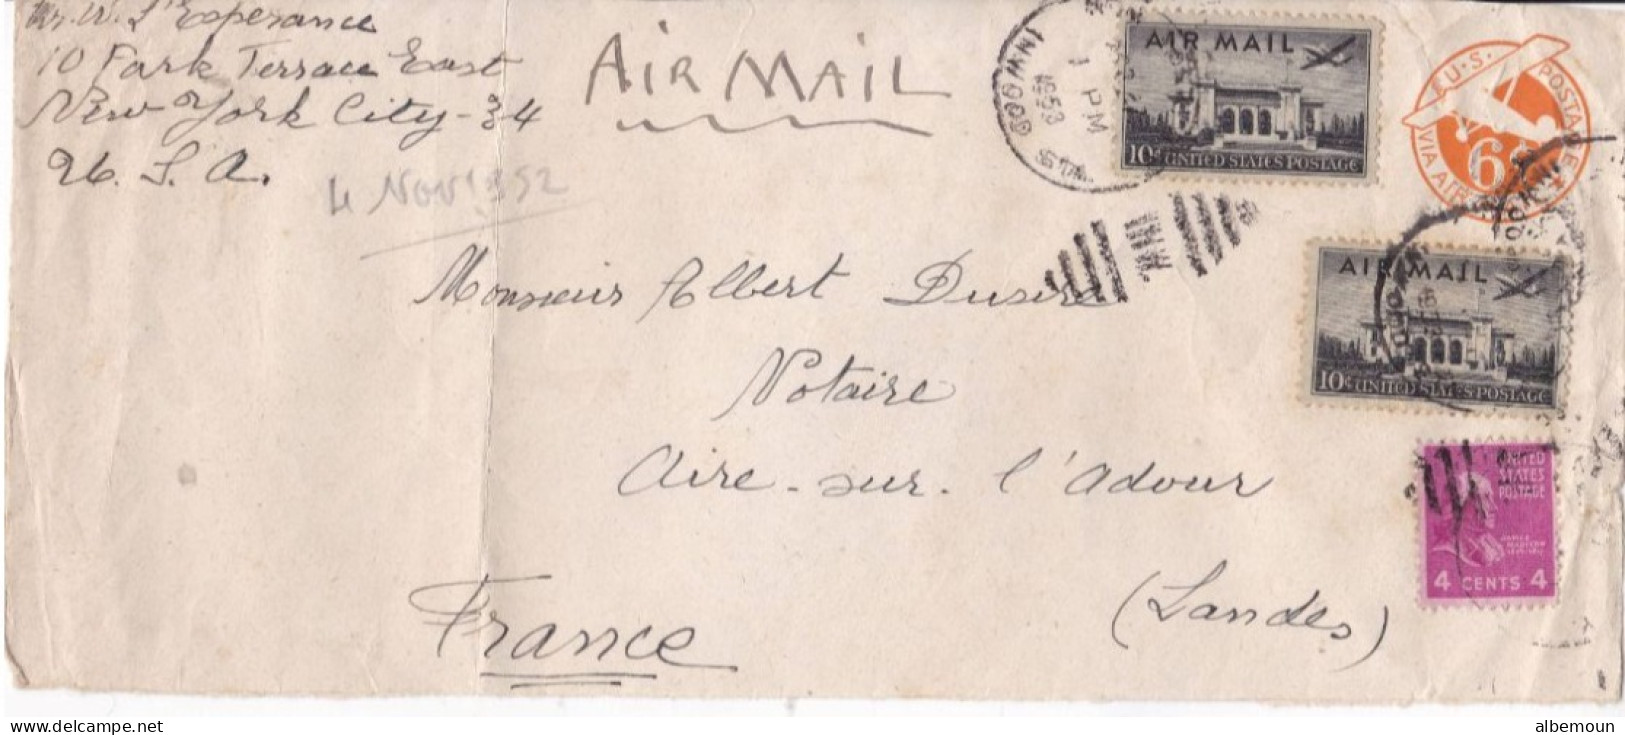 COVER. USA. 24 MAY 1944. US POSTAGE AIR MAIL FROM AIRE/ADOUR  FRANCE 1952 - Gebraucht